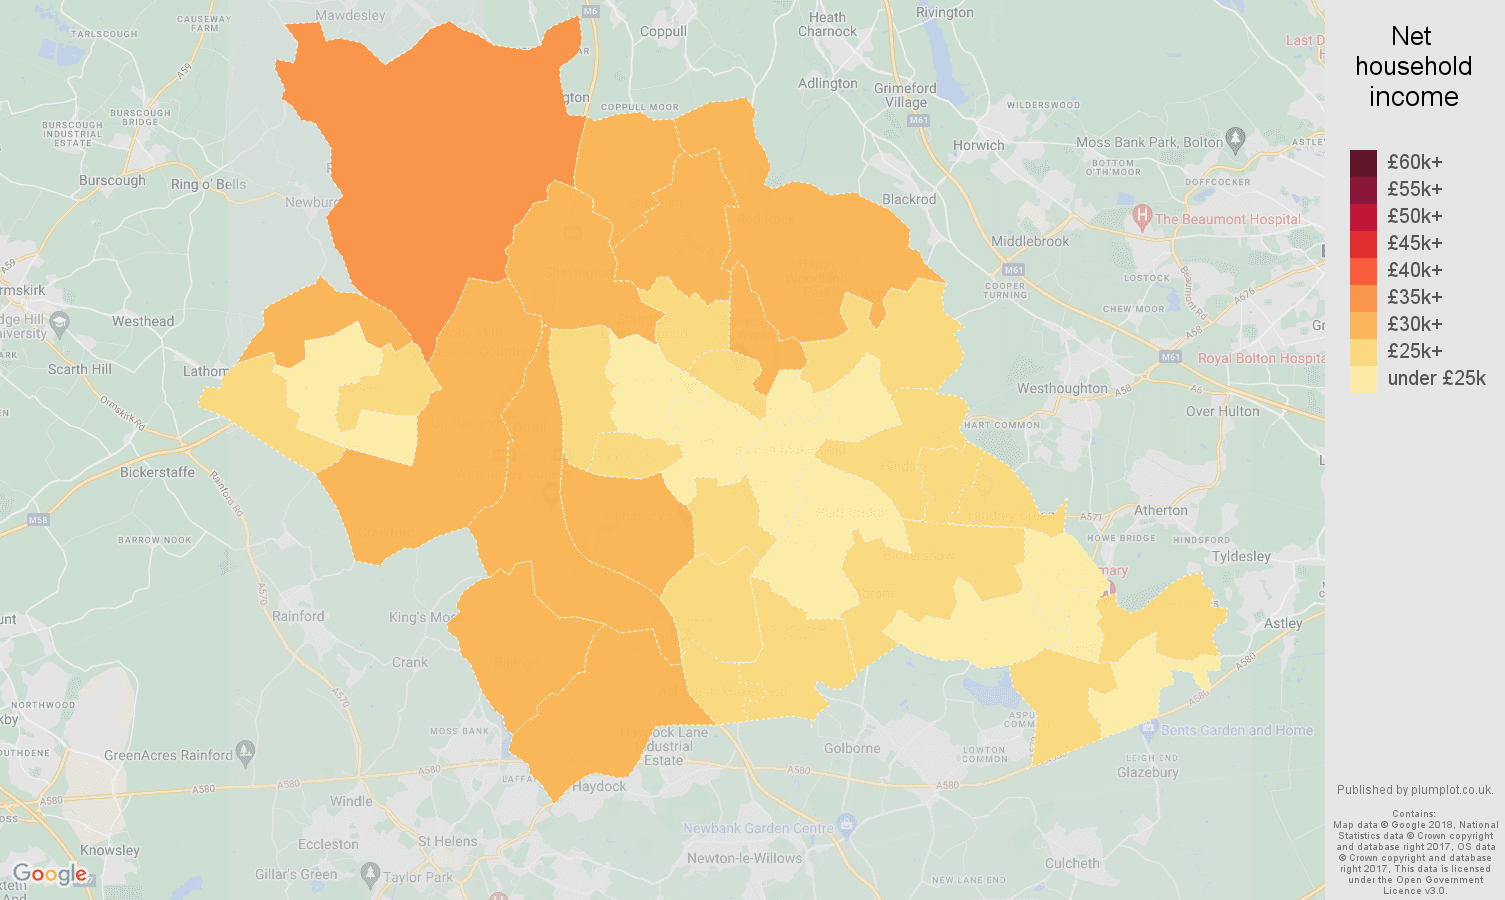 Wigan net household income map